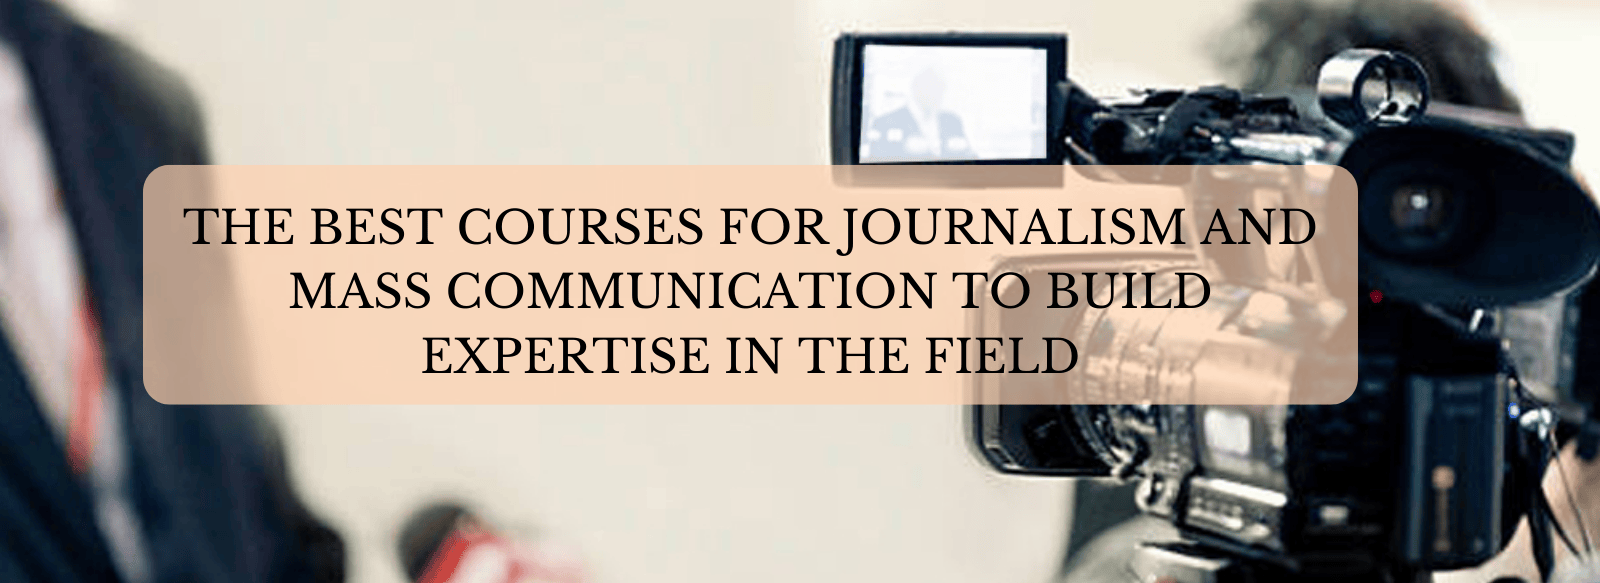 best courses for journalism and mass communication